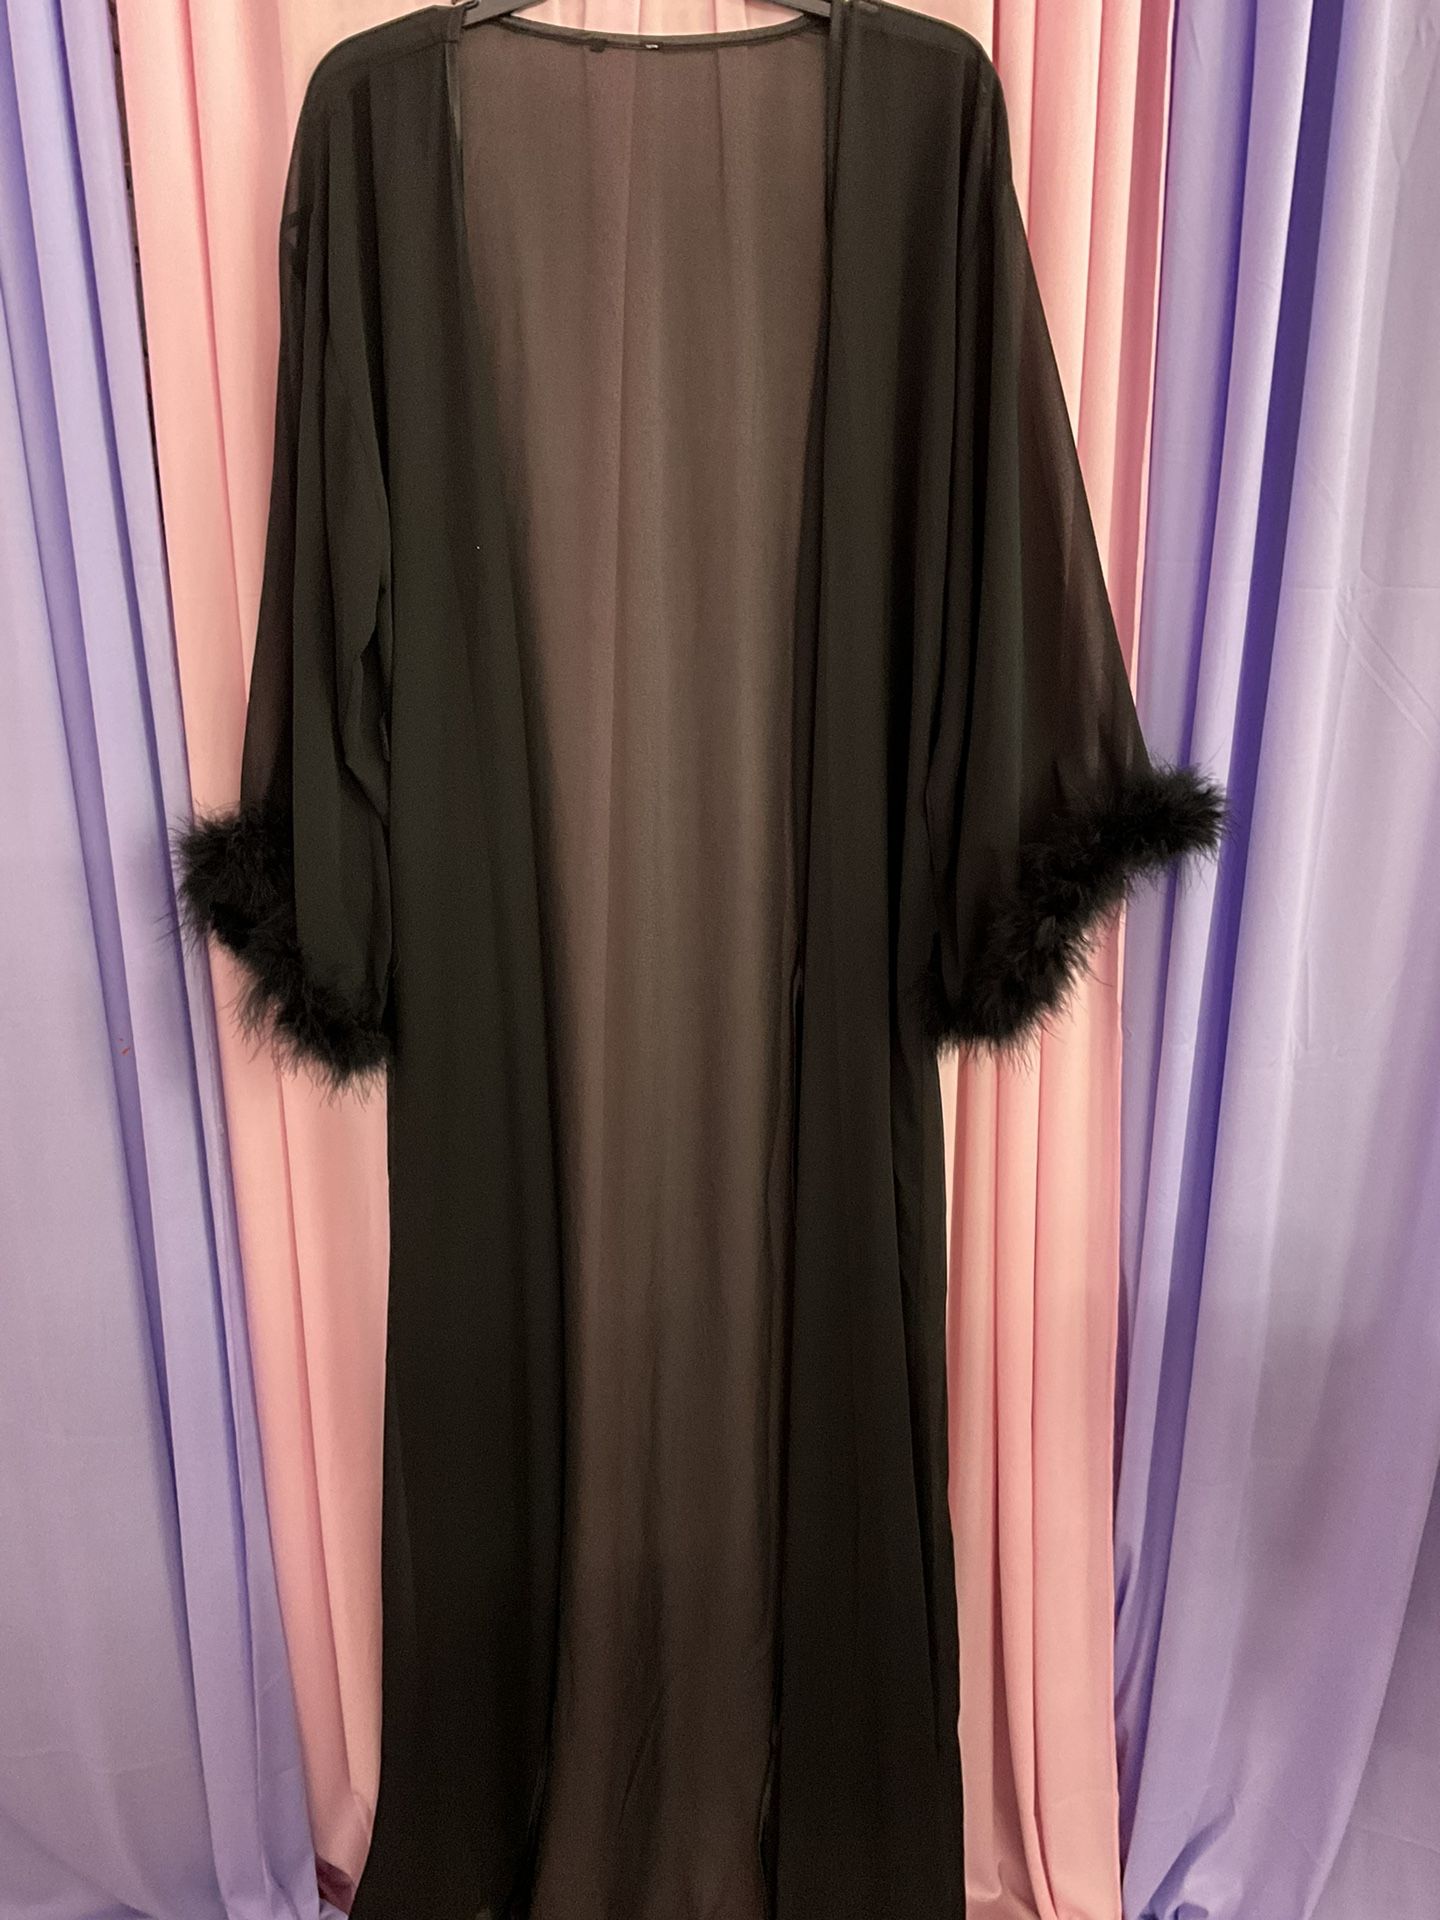 Black Feather Sheer Drag Queen Show Costume Robe